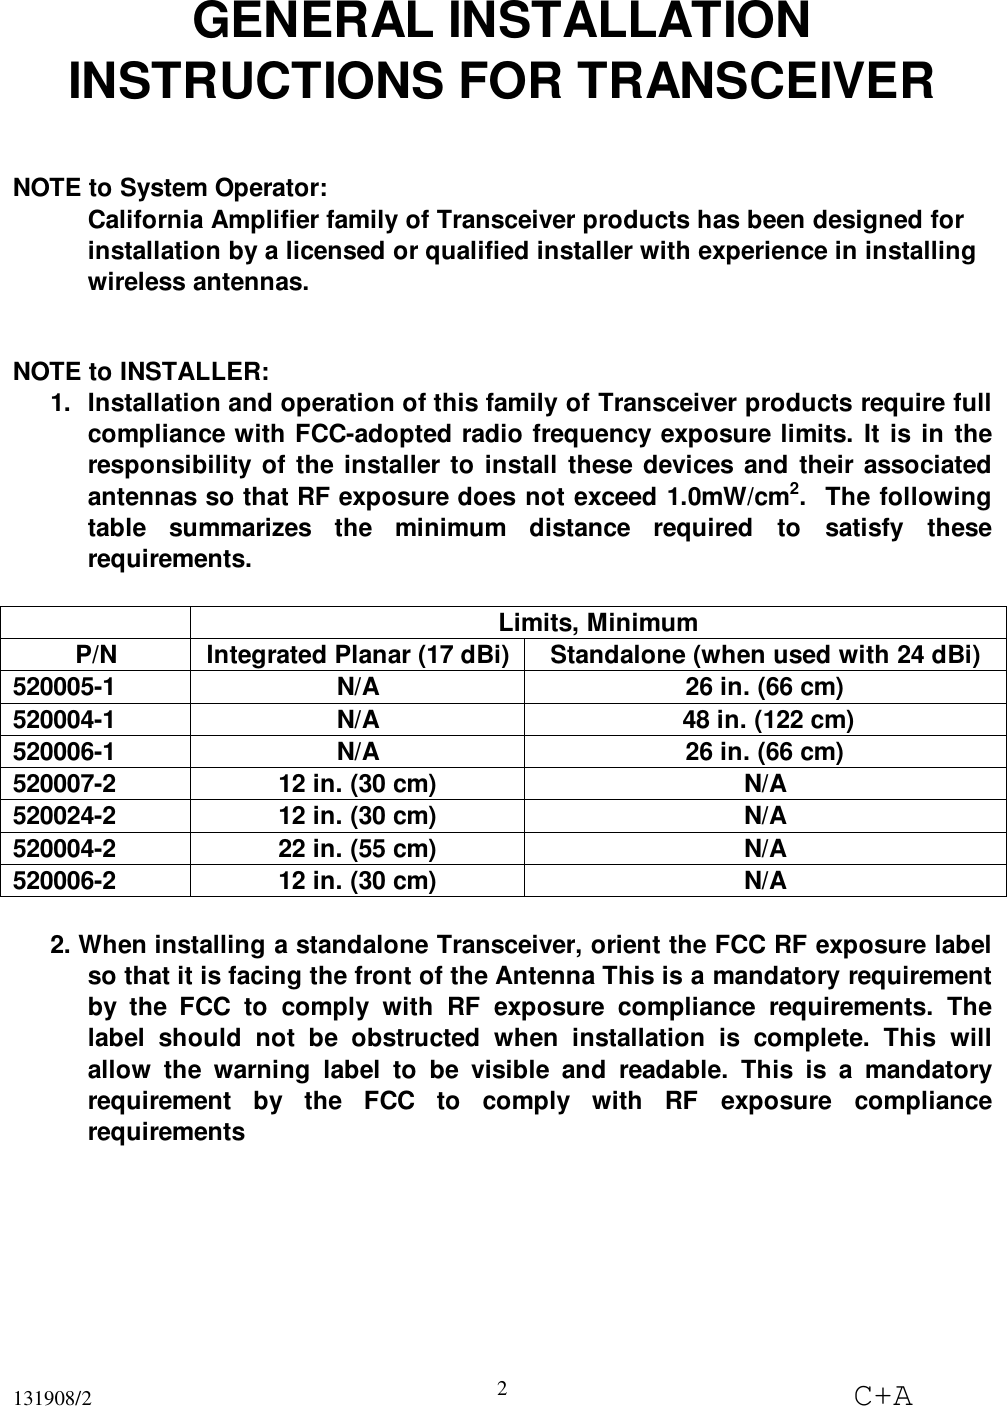 131908/2 C+A2GENERAL INSTALLATIONINSTRUCTIONS FOR TRANSCEIVERNOTE to System Operator:California Amplifier family of Transceiver products has been designed forinstallation by a licensed or qualified installer with experience in installingwireless antennas.NOTE to INSTALLER:1.  Installation and operation of this family of Transceiver products require fullcompliance with FCC-adopted radio frequency exposure limits. It is in theresponsibility of the installer to install these devices and their associatedantennas so that RF exposure does not exceed 1.0mW/cm2.  The followingtable summarizes the minimum distance required to satisfy theserequirements.Limits, MinimumP/N Integrated Planar (17 dBi) Standalone (when used with 24 dBi)520005-1 N/A 26 in. (66 cm)520004-1 N/A  48 in. (122 cm)520006-1 N/A 26 in. (66 cm)520007-2 12 in. (30 cm) N/A520024-2 12 in. (30 cm) N/A520004-2 22 in. (55 cm) N/A520006-2 12 in. (30 cm) N/A2. When installing a standalone Transceiver, orient the FCC RF exposure labelso that it is facing the front of the Antenna This is a mandatory requirementby the FCC to comply with RF exposure compliance requirements. Thelabel should not be obstructed when installation is complete. This willallow the warning label to be visible and readable. This is a mandatoryrequirement by the FCC to comply with RF exposure compliancerequirements